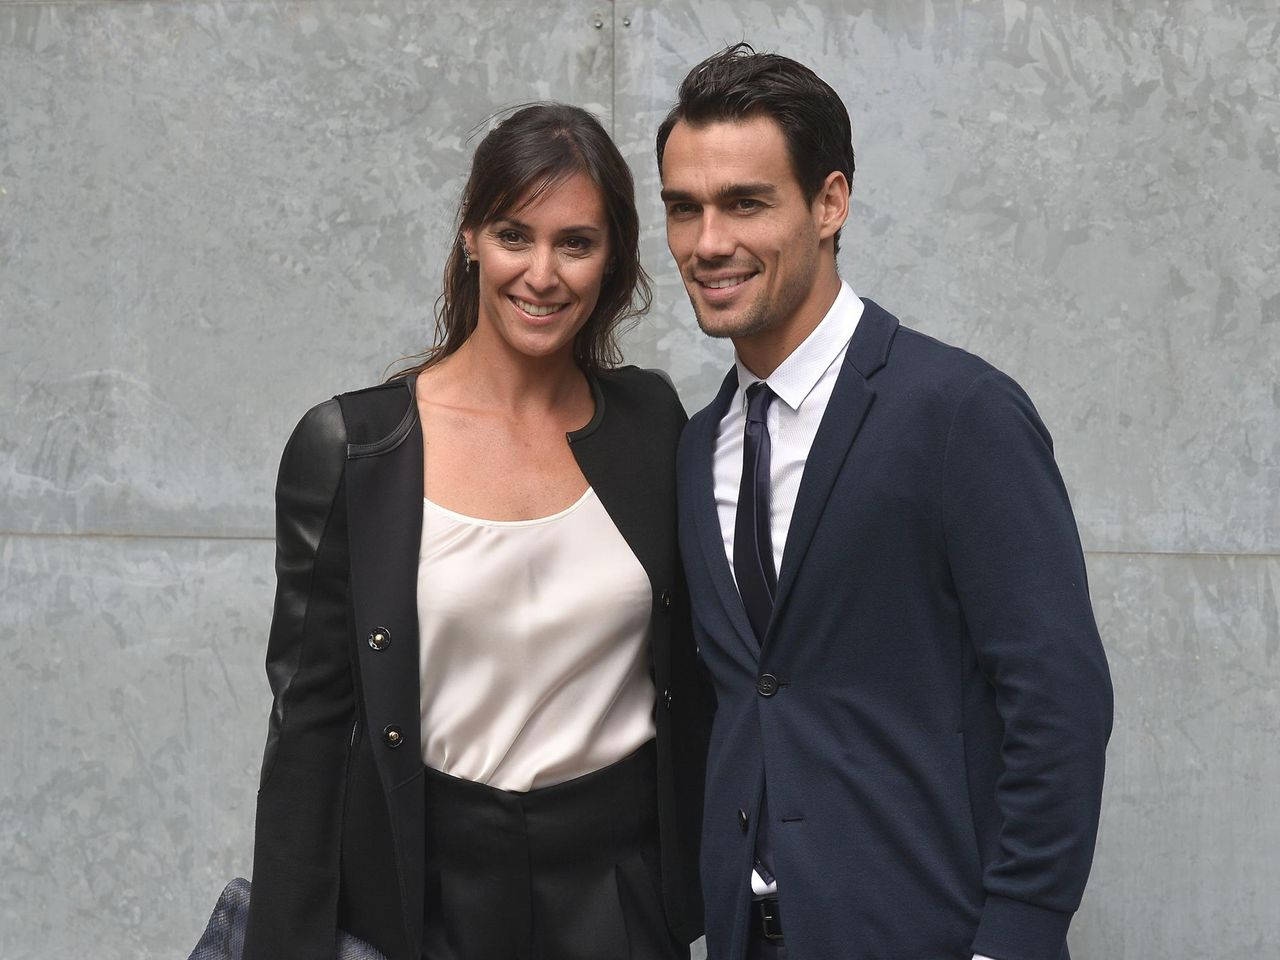 Flavia Pennetta and her husband posing for a picture Wallpaper